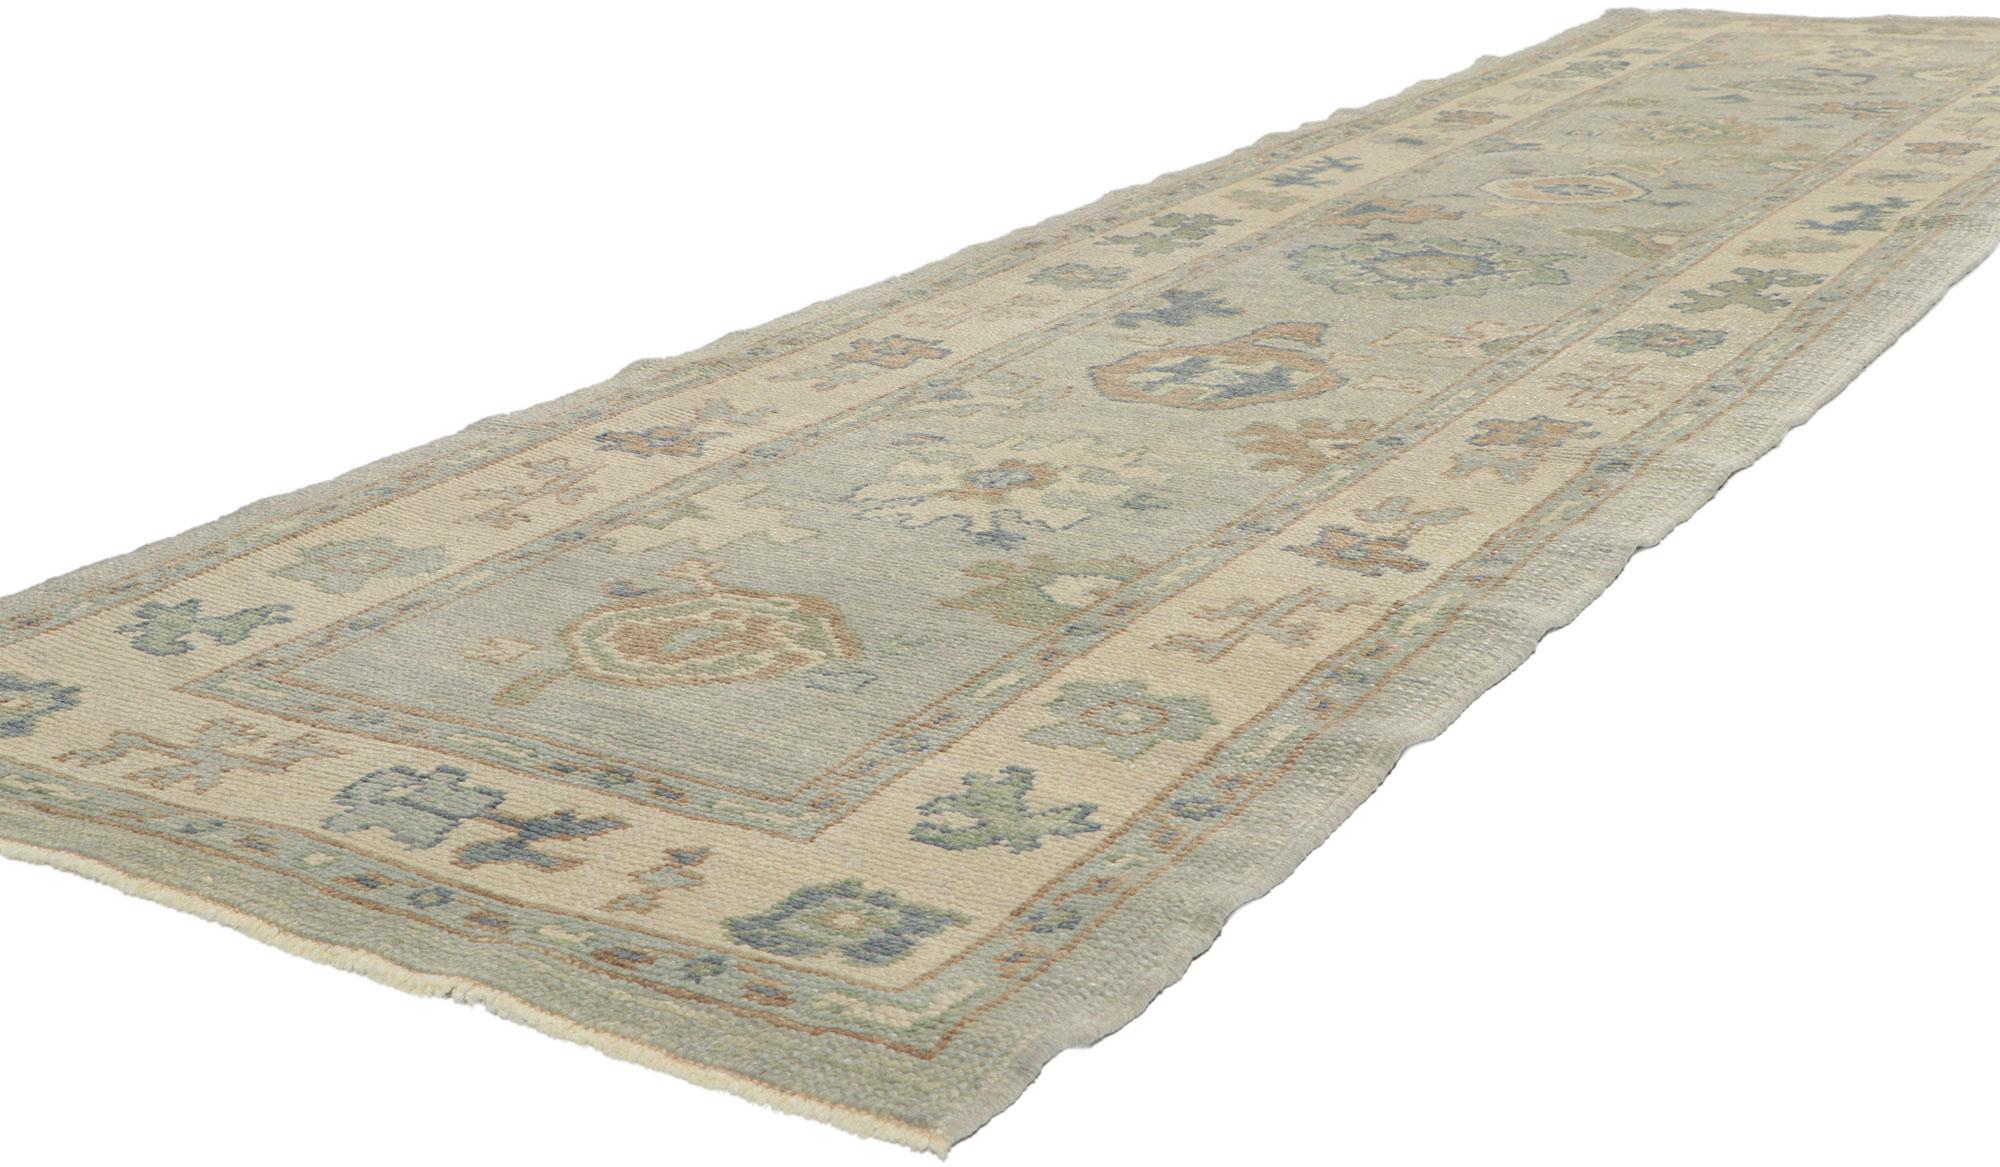 53795 new Contemporary Turkish Oushak Hallway Runner with Modern style 03'02 x 11'09This hand-knotted wool contemporary Turkish Oushak runner features an all-over botanical pattern composed of amorphous organic motifs spread across an abrashed baby